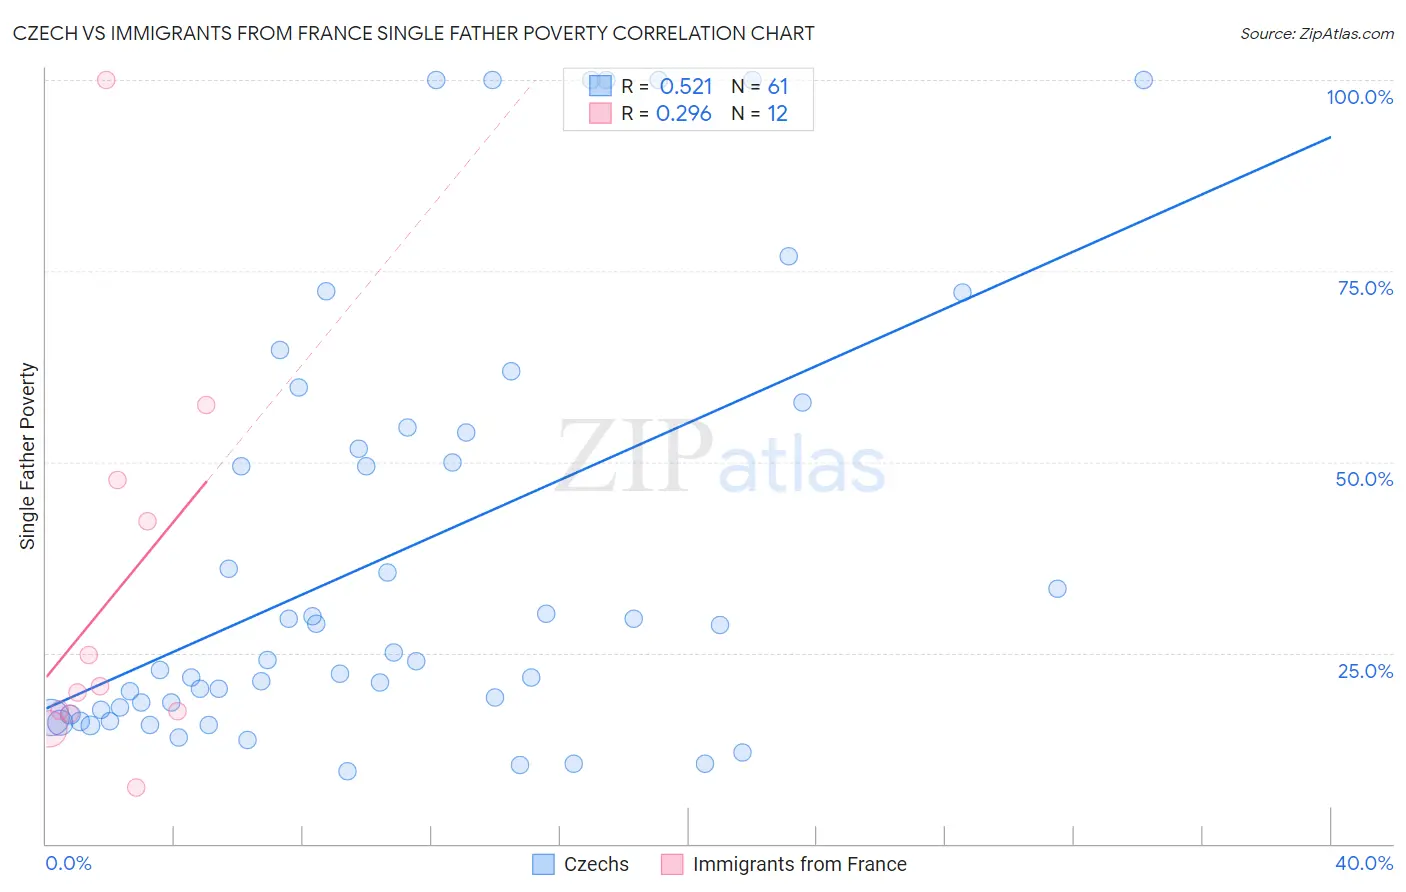 Czech vs Immigrants from France Single Father Poverty